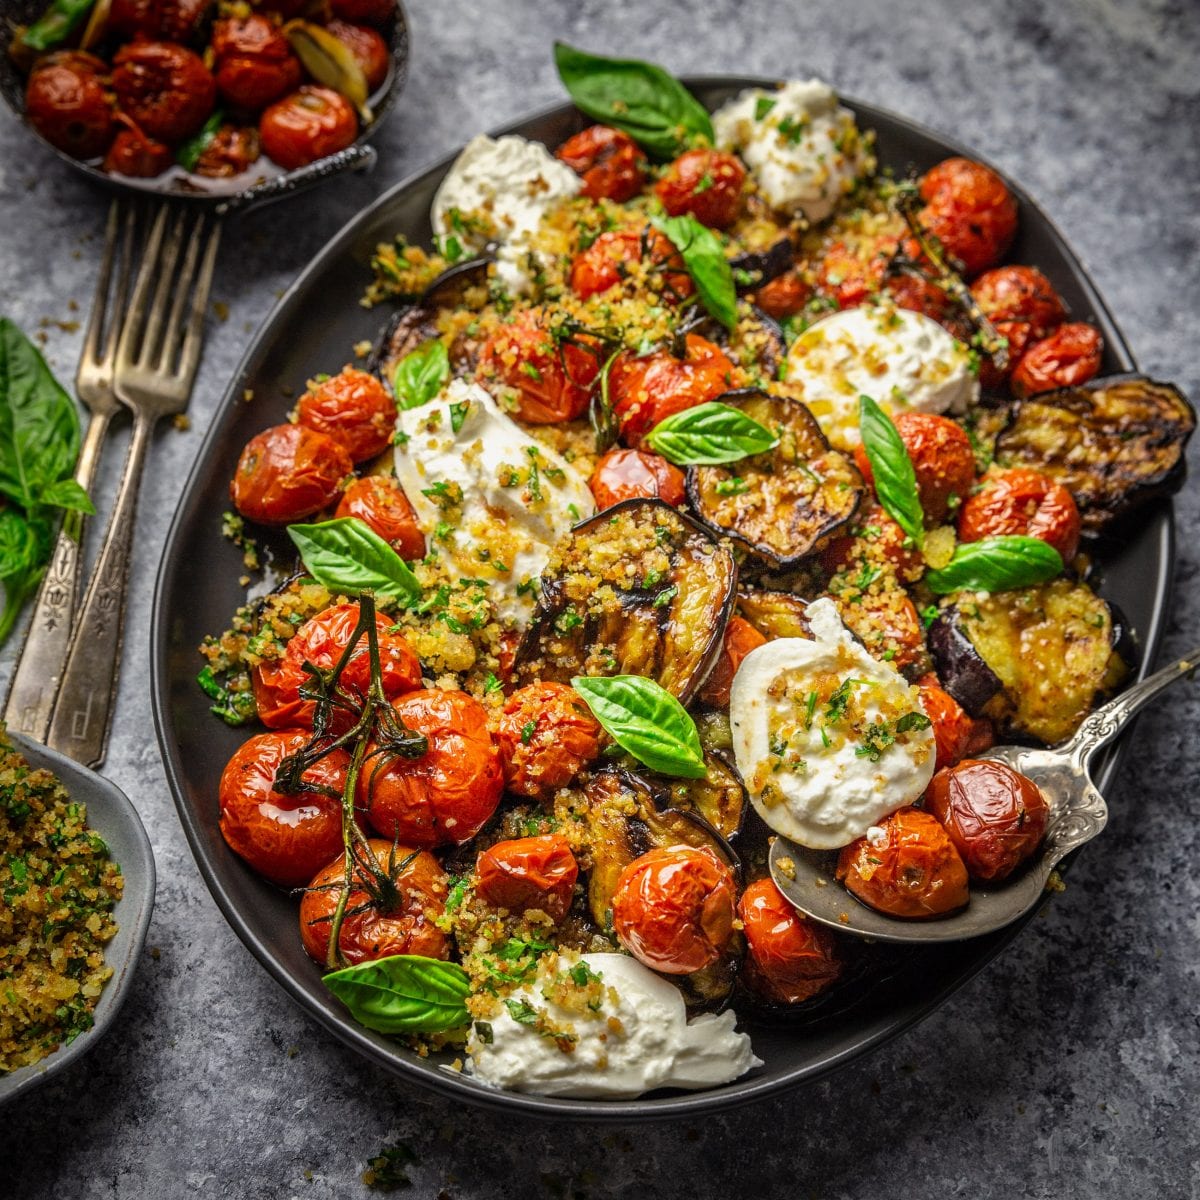 A Light Grilled Eggplant Parmesan With Roasted Tomatoes And Burrata,Sea Bass Recipes Rick Stein